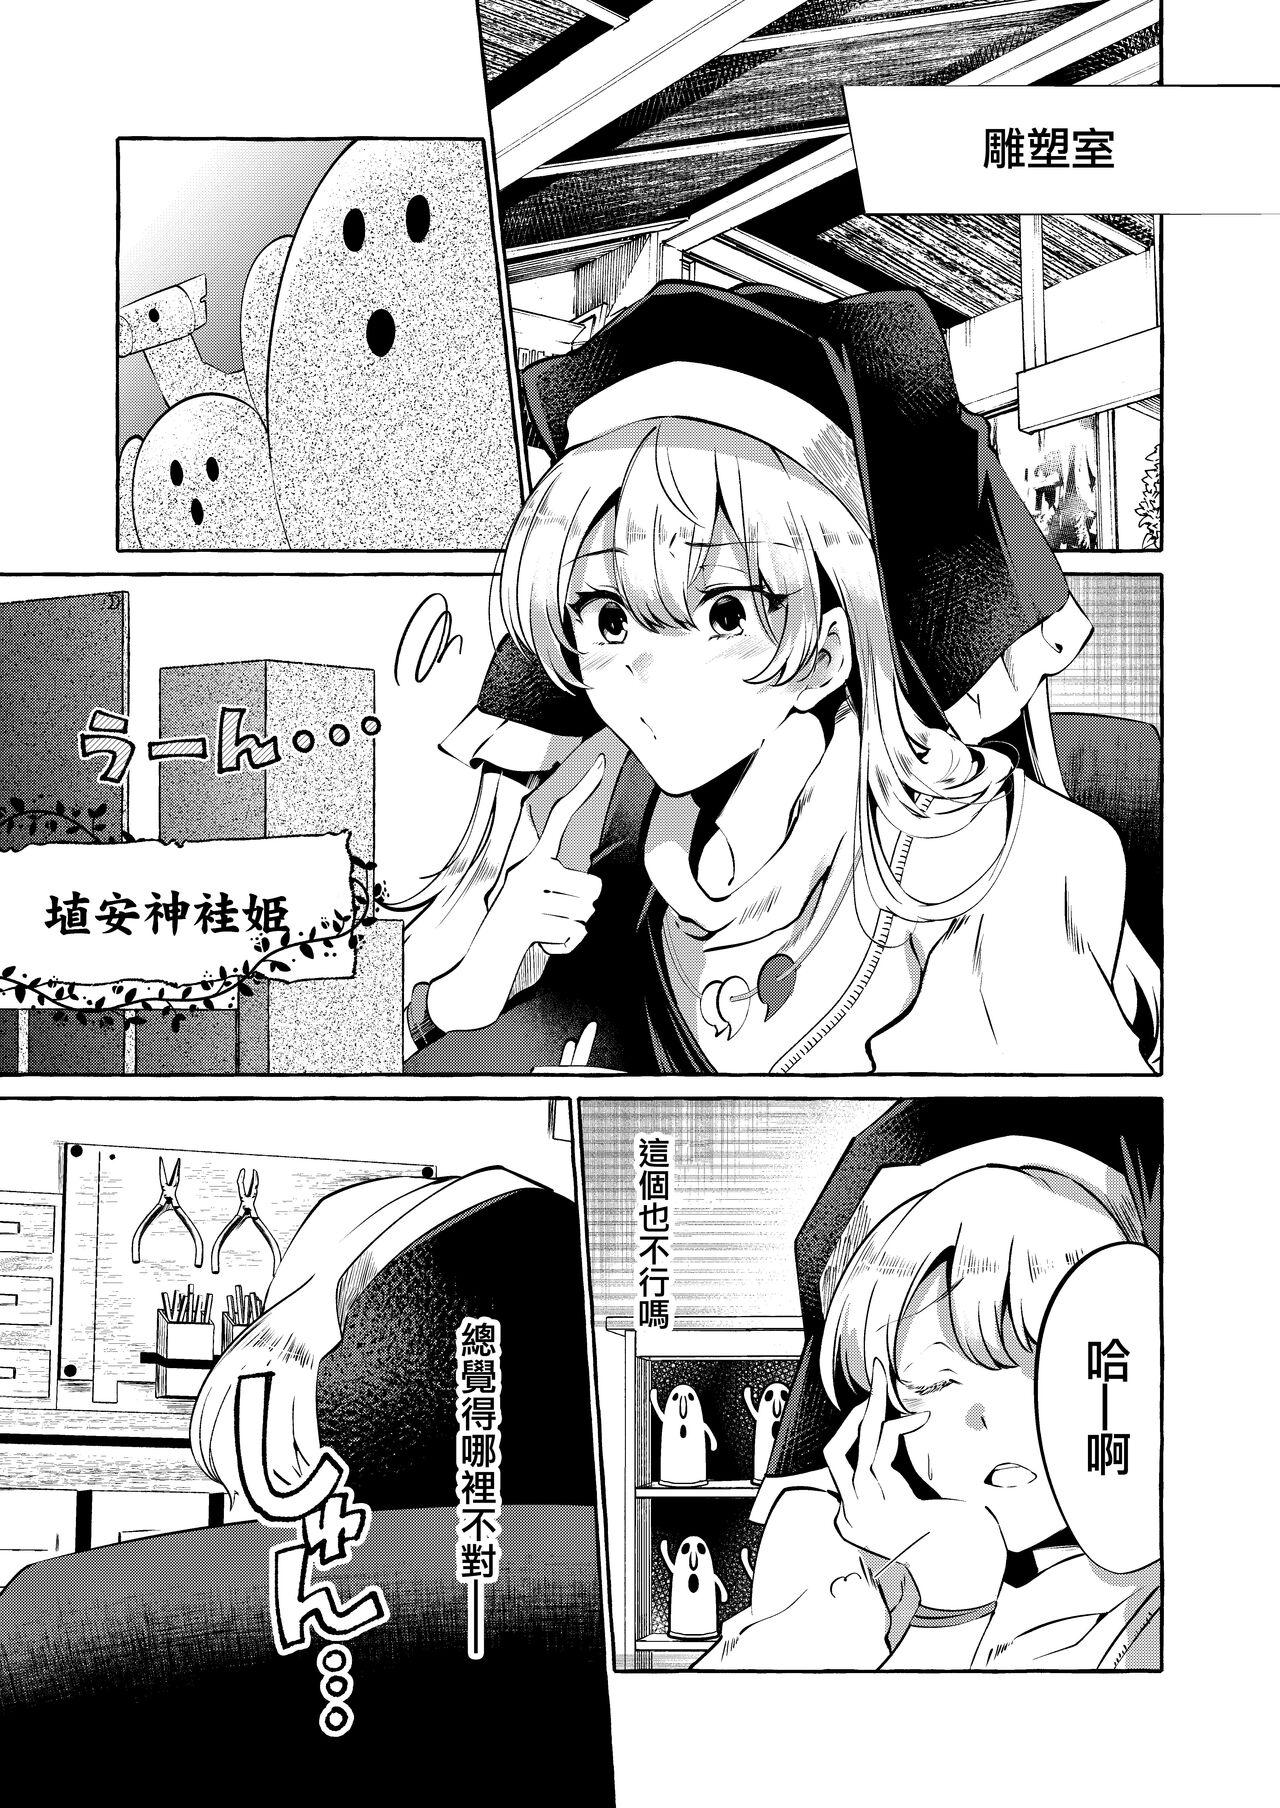 Cheating Wife 妄想に肢体を委ねて - Touhou project Oldyoung - Picture 2